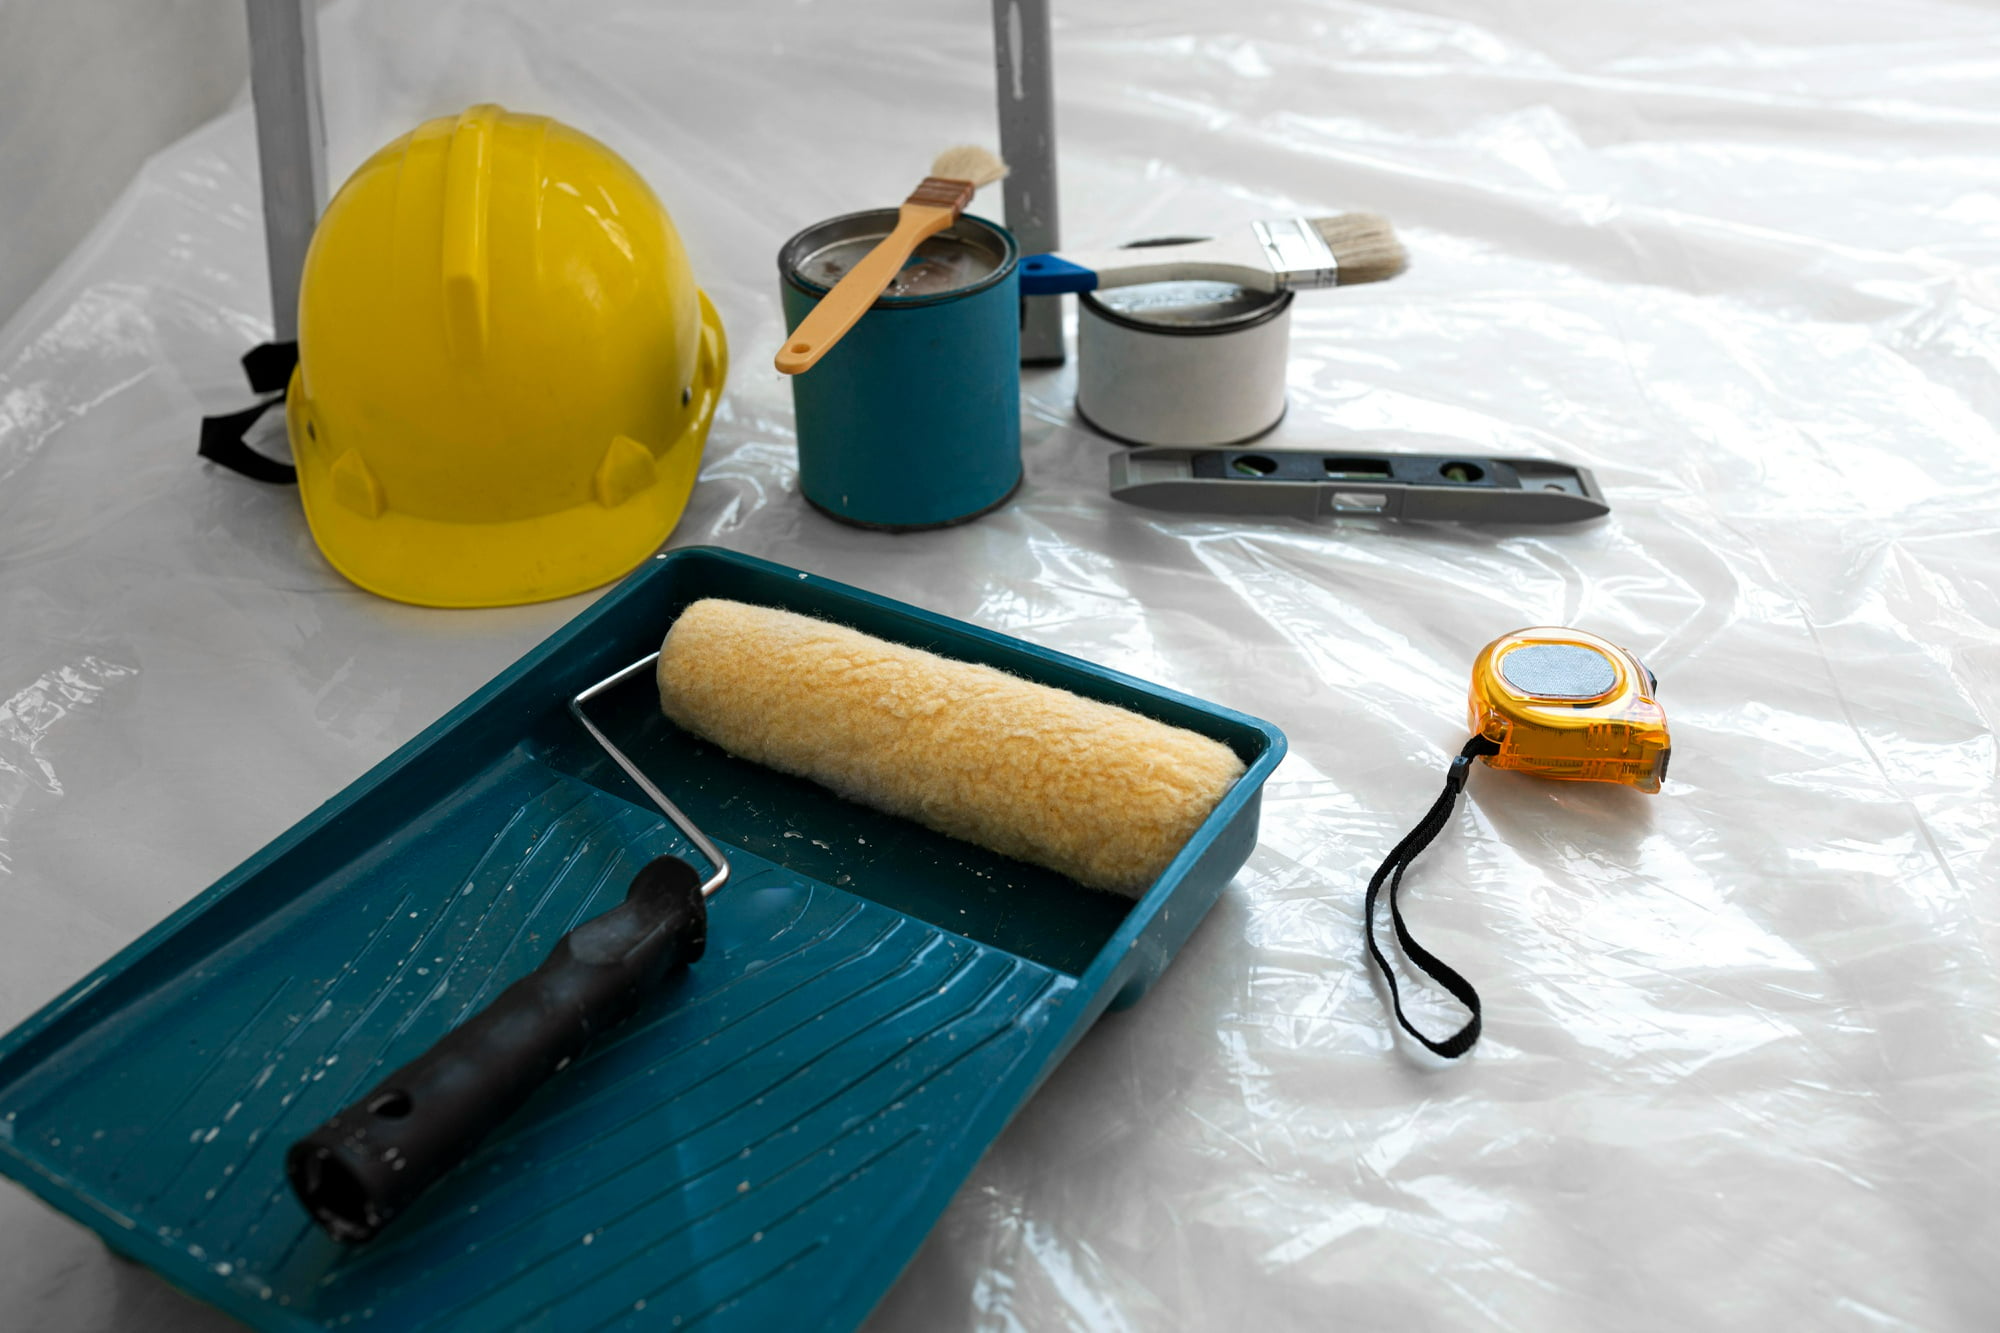 paint-supplies-on-plastic-sheet-on-floor-abiding-by-tips-for-preventing-fire-damage-during-home-renovation